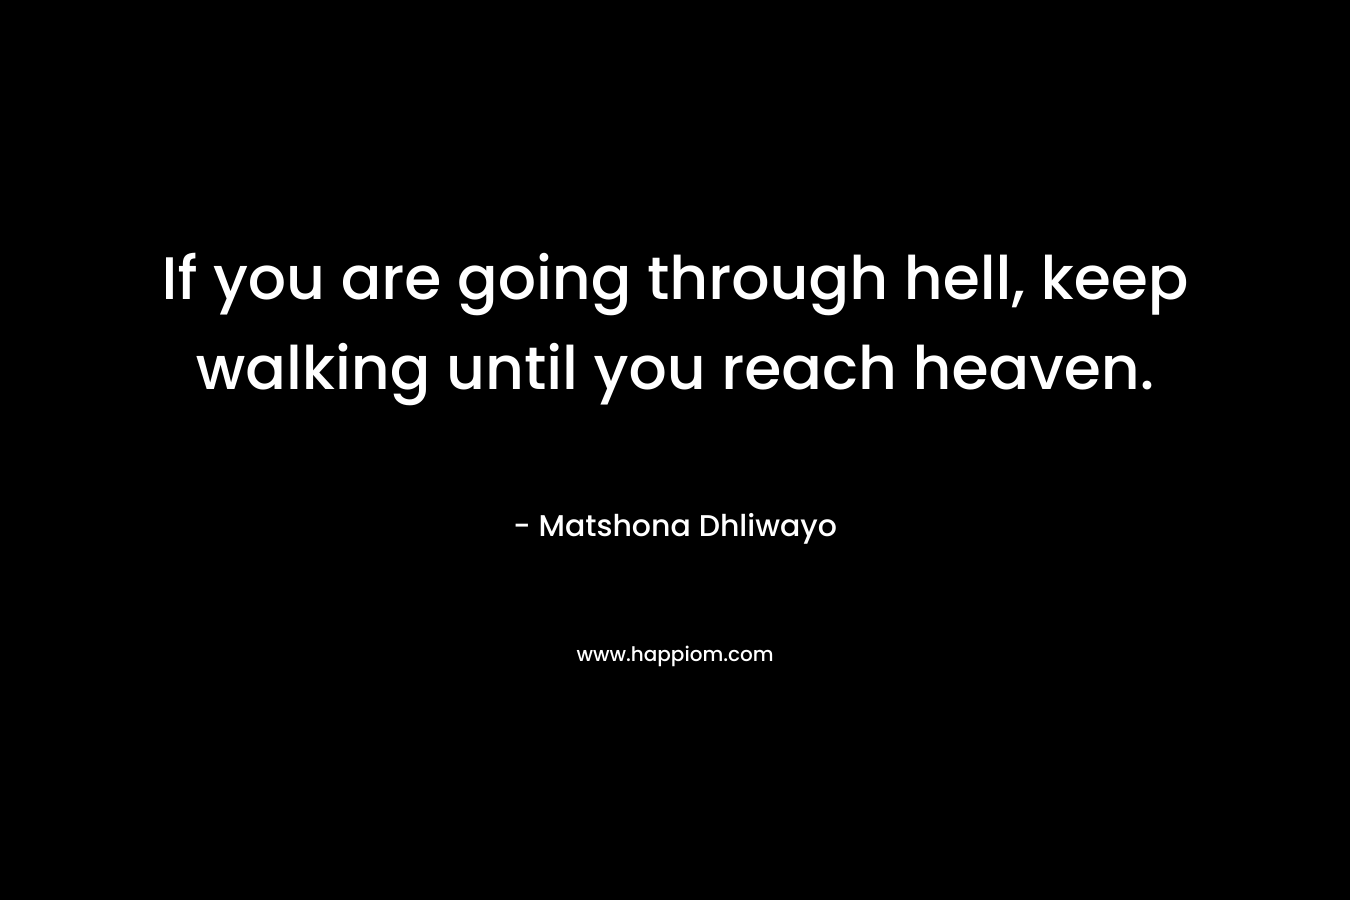 If you are going through hell, keep walking until you reach heaven.